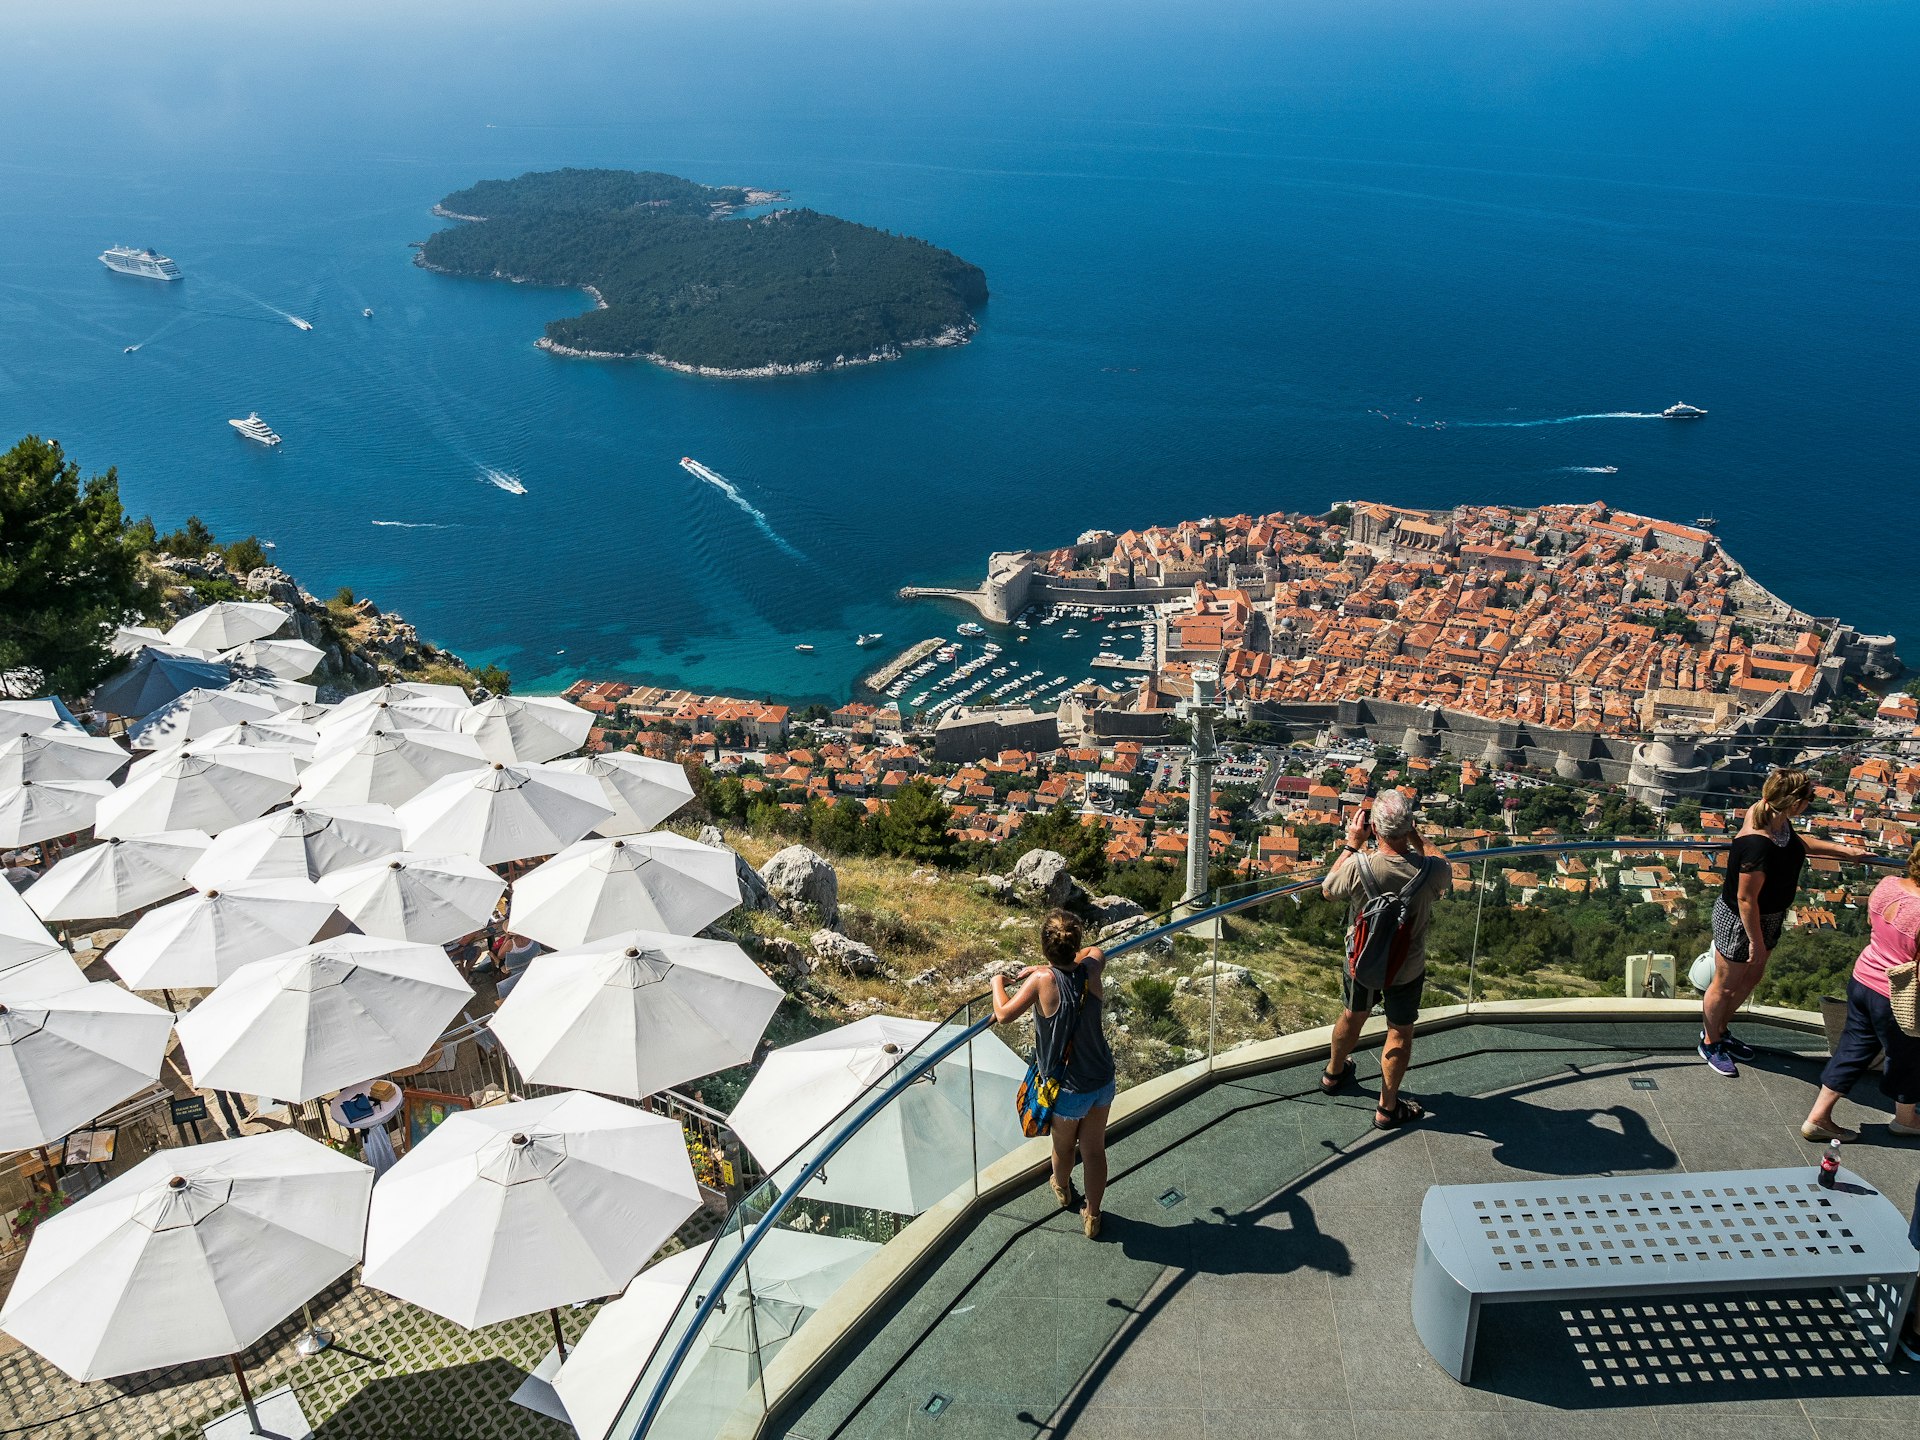 Visitors at the lookout on Srd Hill above Dubrovnik.